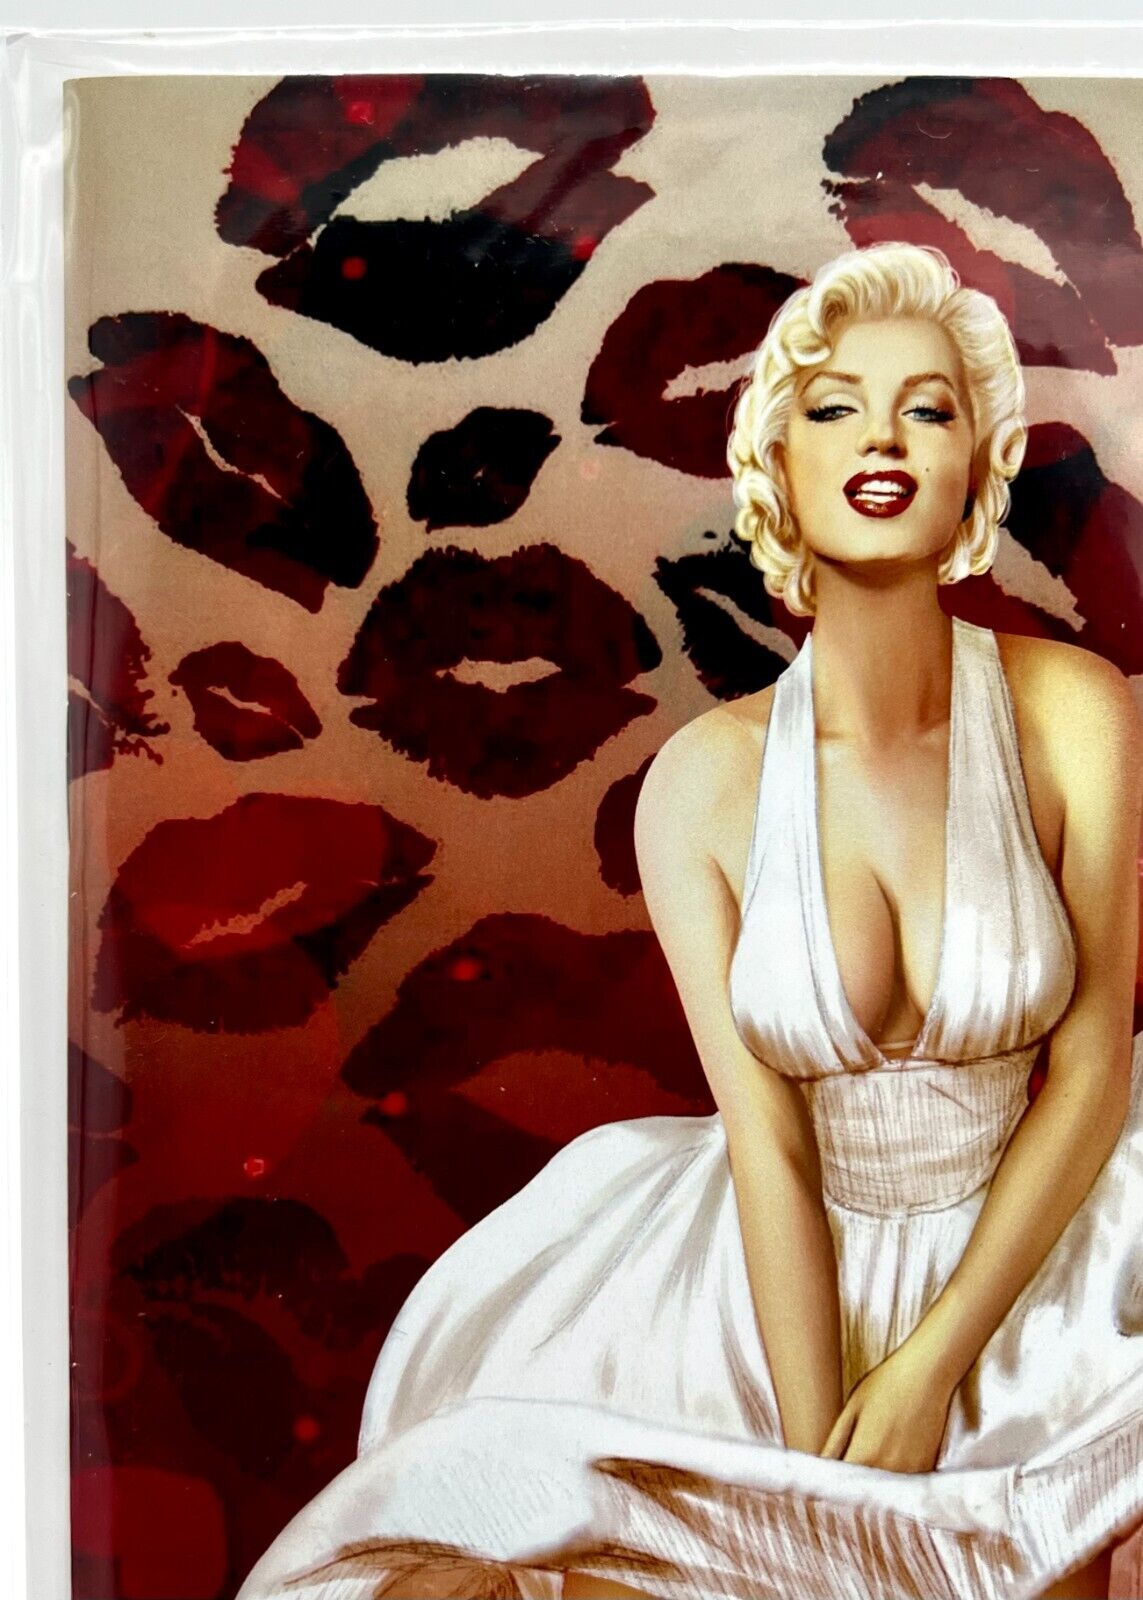 Faro's Lounge Marilyn Monroe Sidney Augusto VIRGIN LIMITED EDITION TO 50